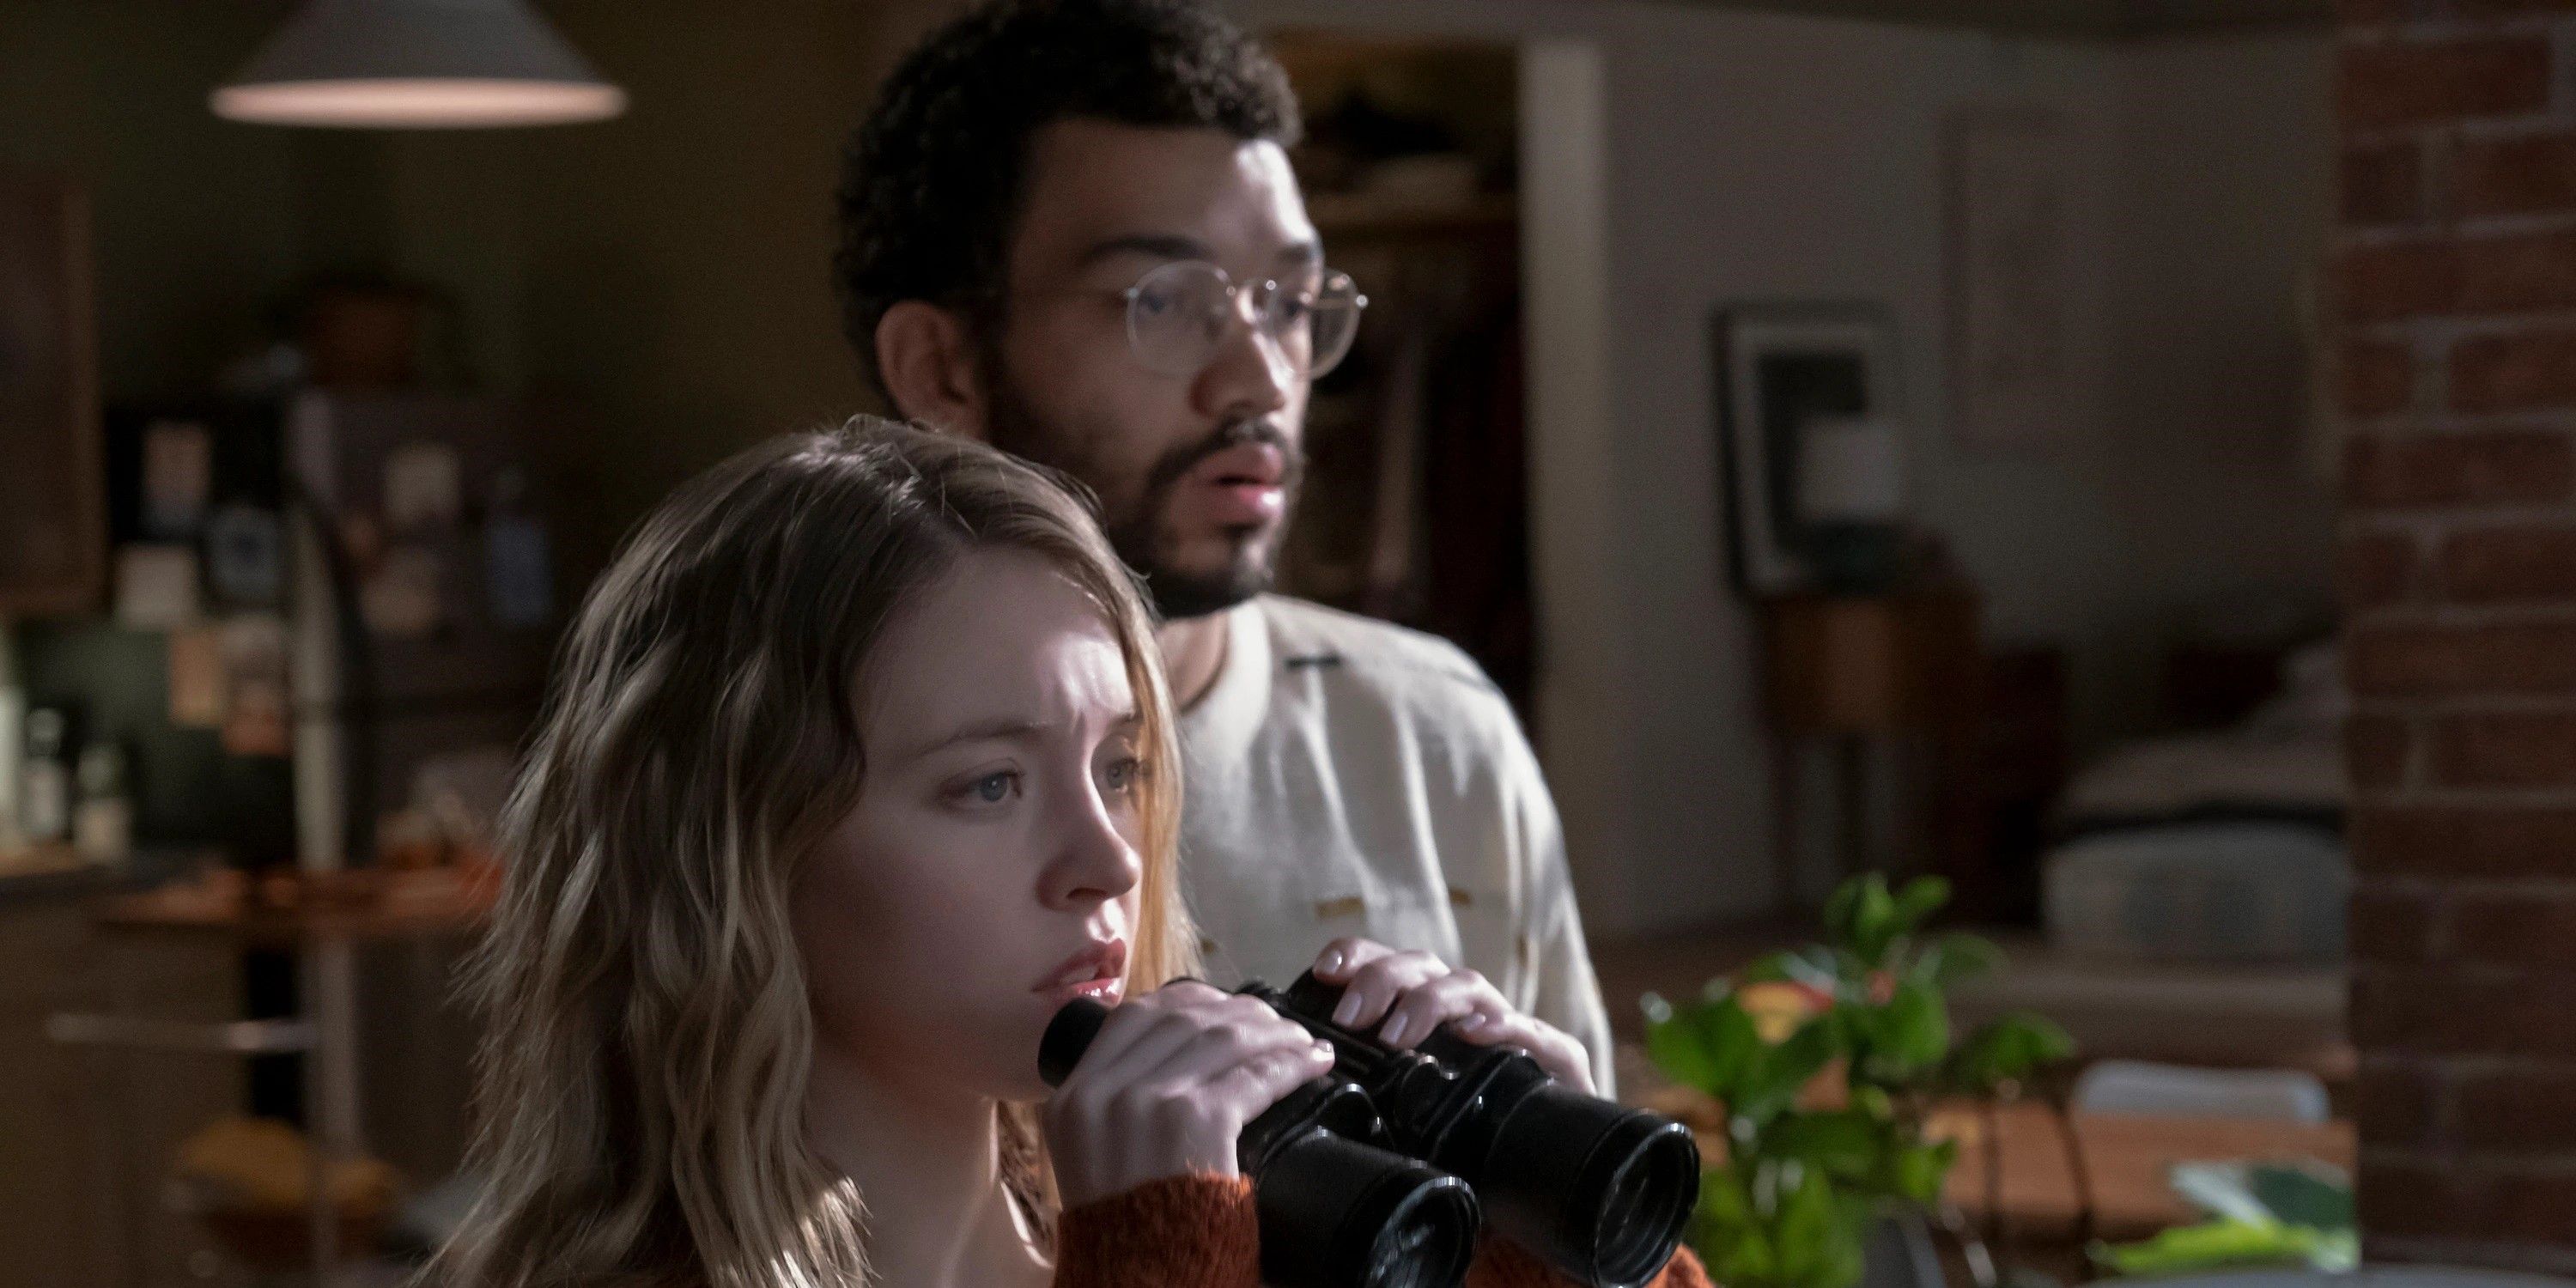 Sydney Sweeney and Justice Smith (as Pippa and Thomas in The Voyers)